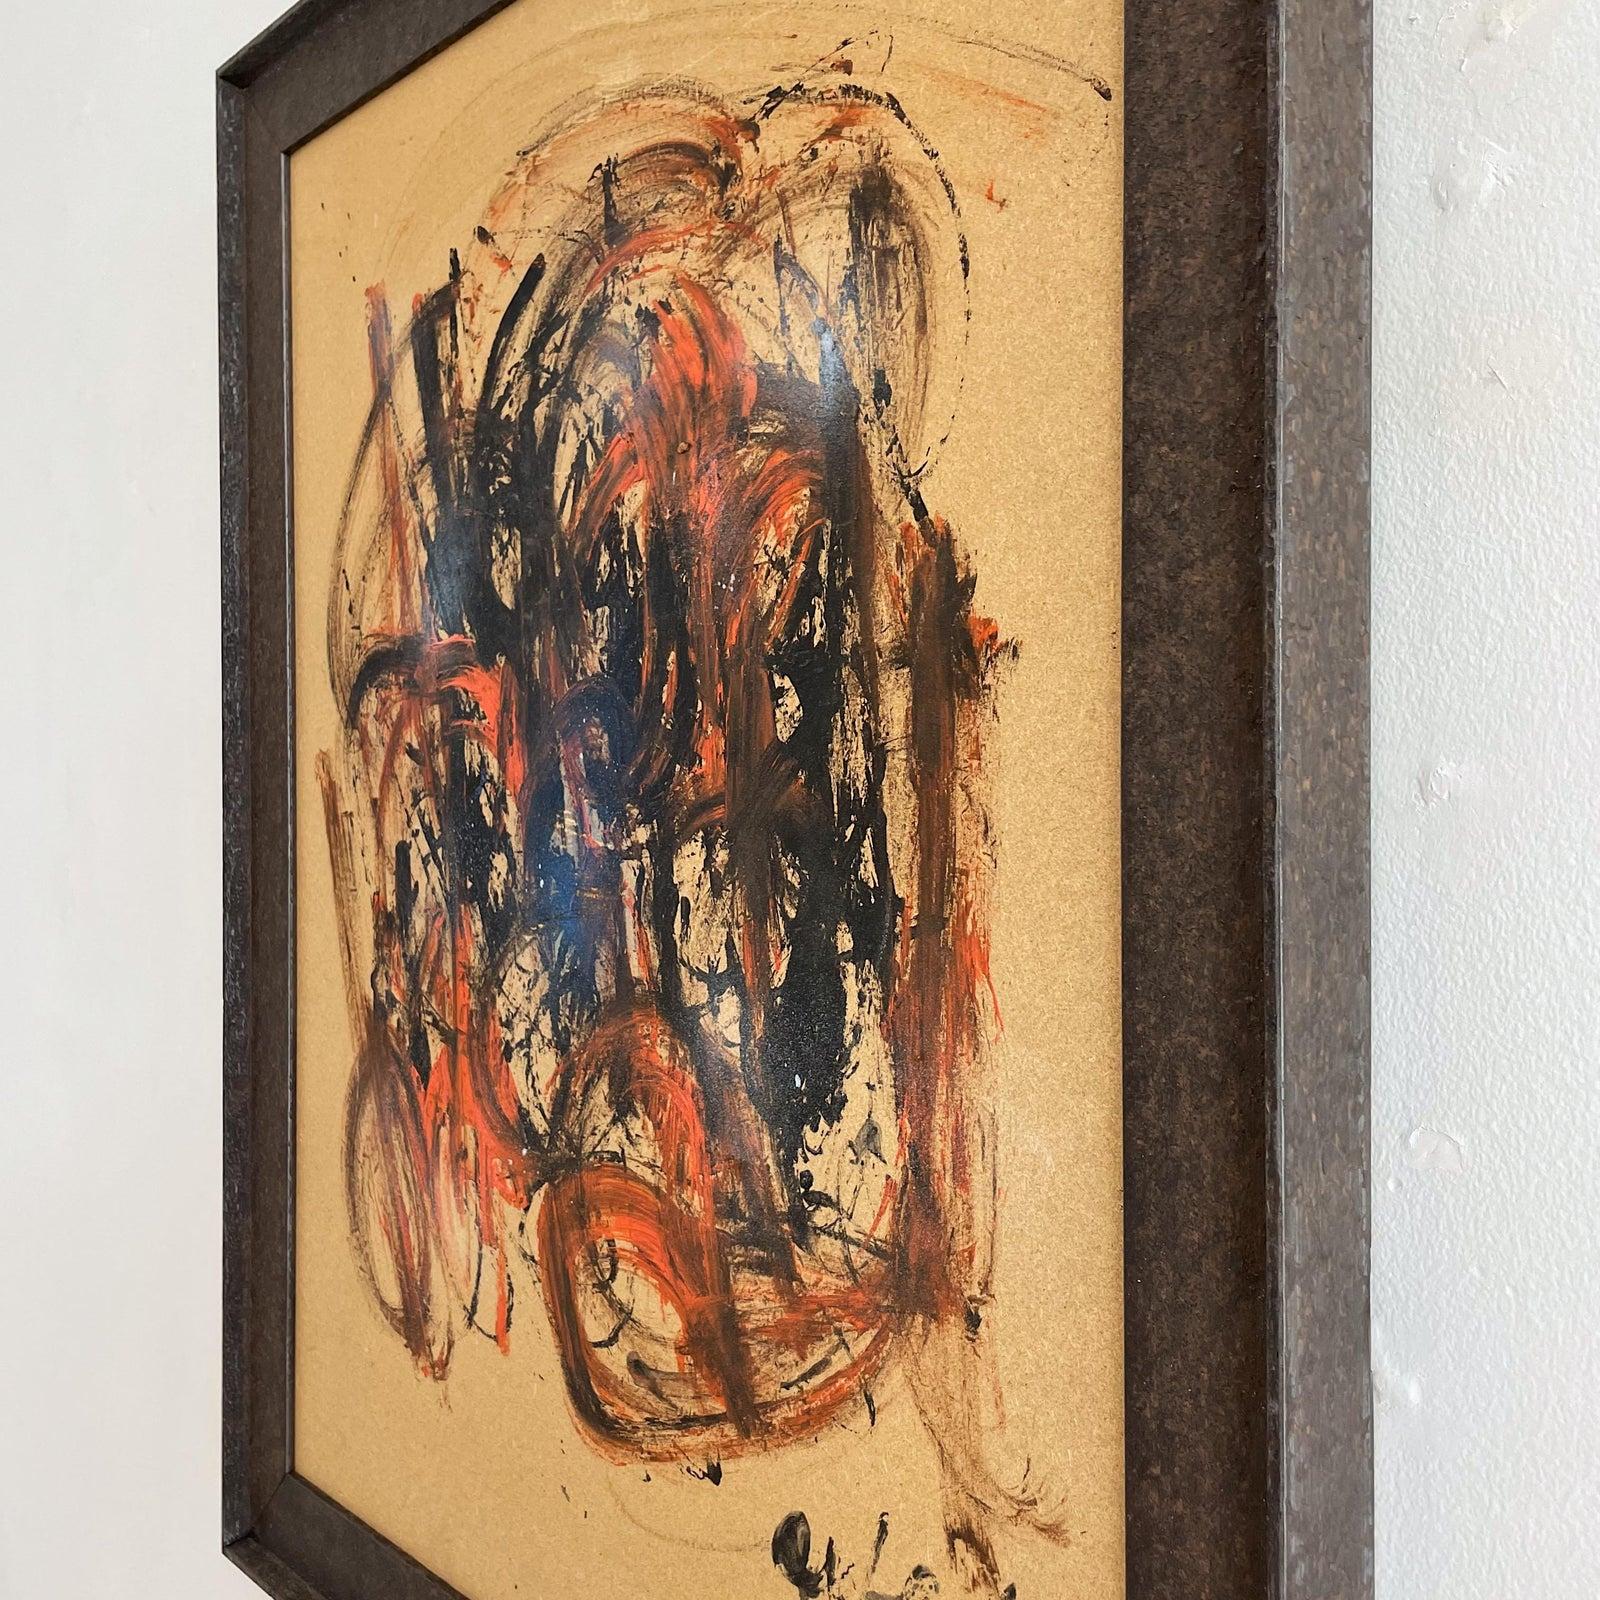 Original abstract oil on board painting by Karel Appel circa 1971, signed on lower front right and reverse. Newly framed in Larson Juhl frame.

Karel Appel, (born April 25, 1921, Amsterdam, Netherlands—died May 3, 2006, Zürich, Switzerland), Dutch